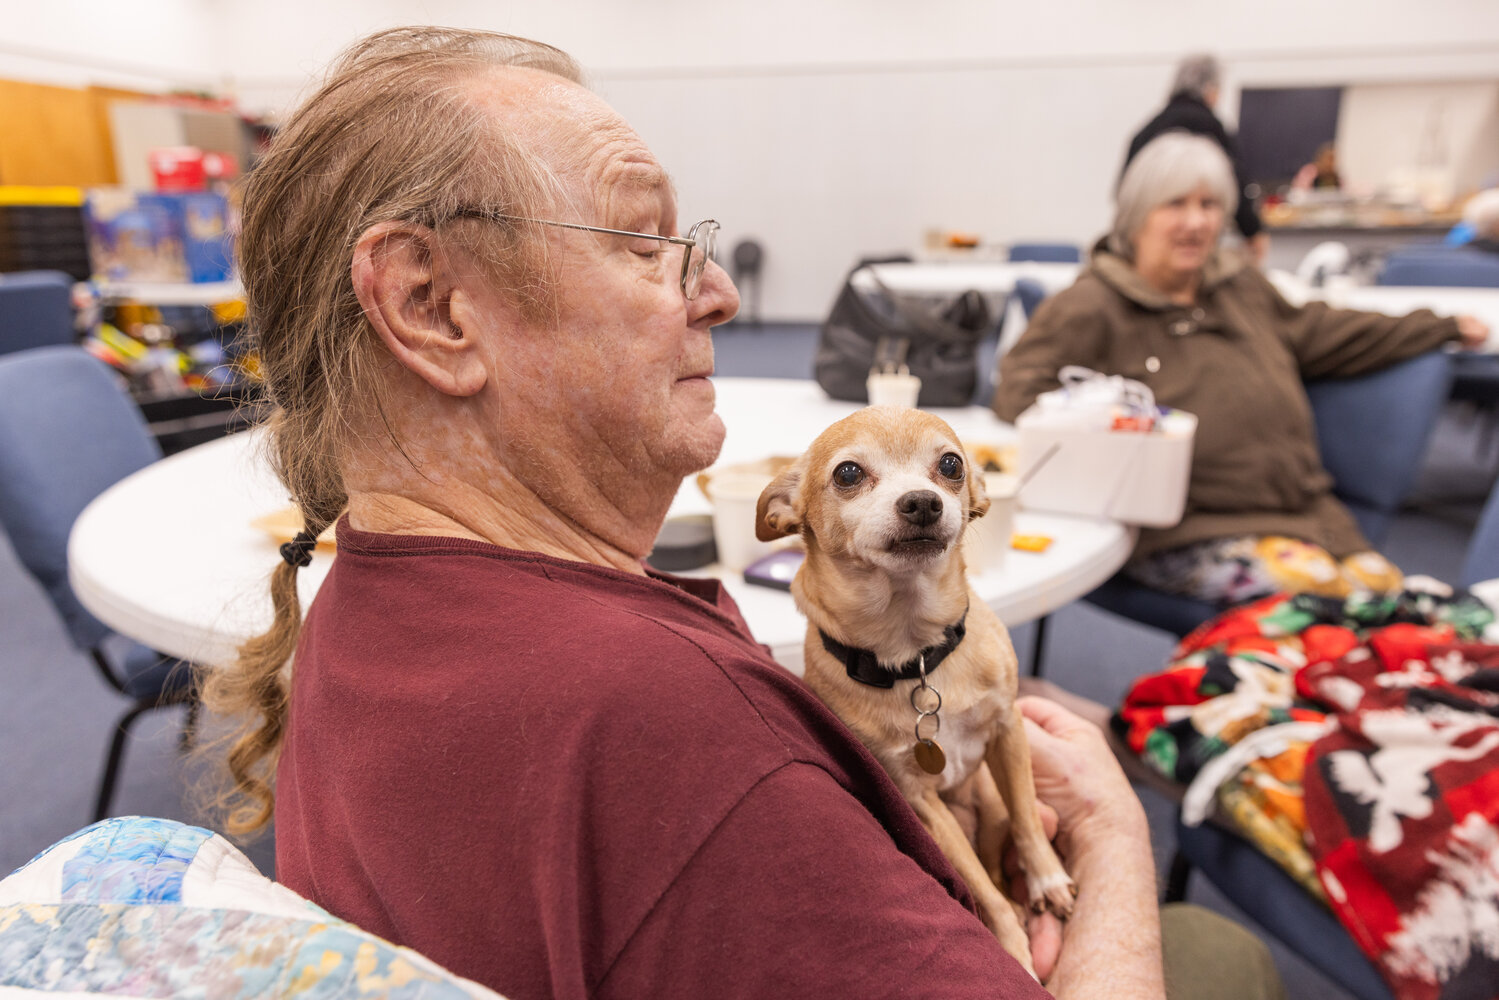 Charles Burgie, 73, smiles while holding Zeus, a Chihuahua, after he was evacuated from his residence at the Centralia Manor Apartments following a fire on Wednesday, Nov. 29.